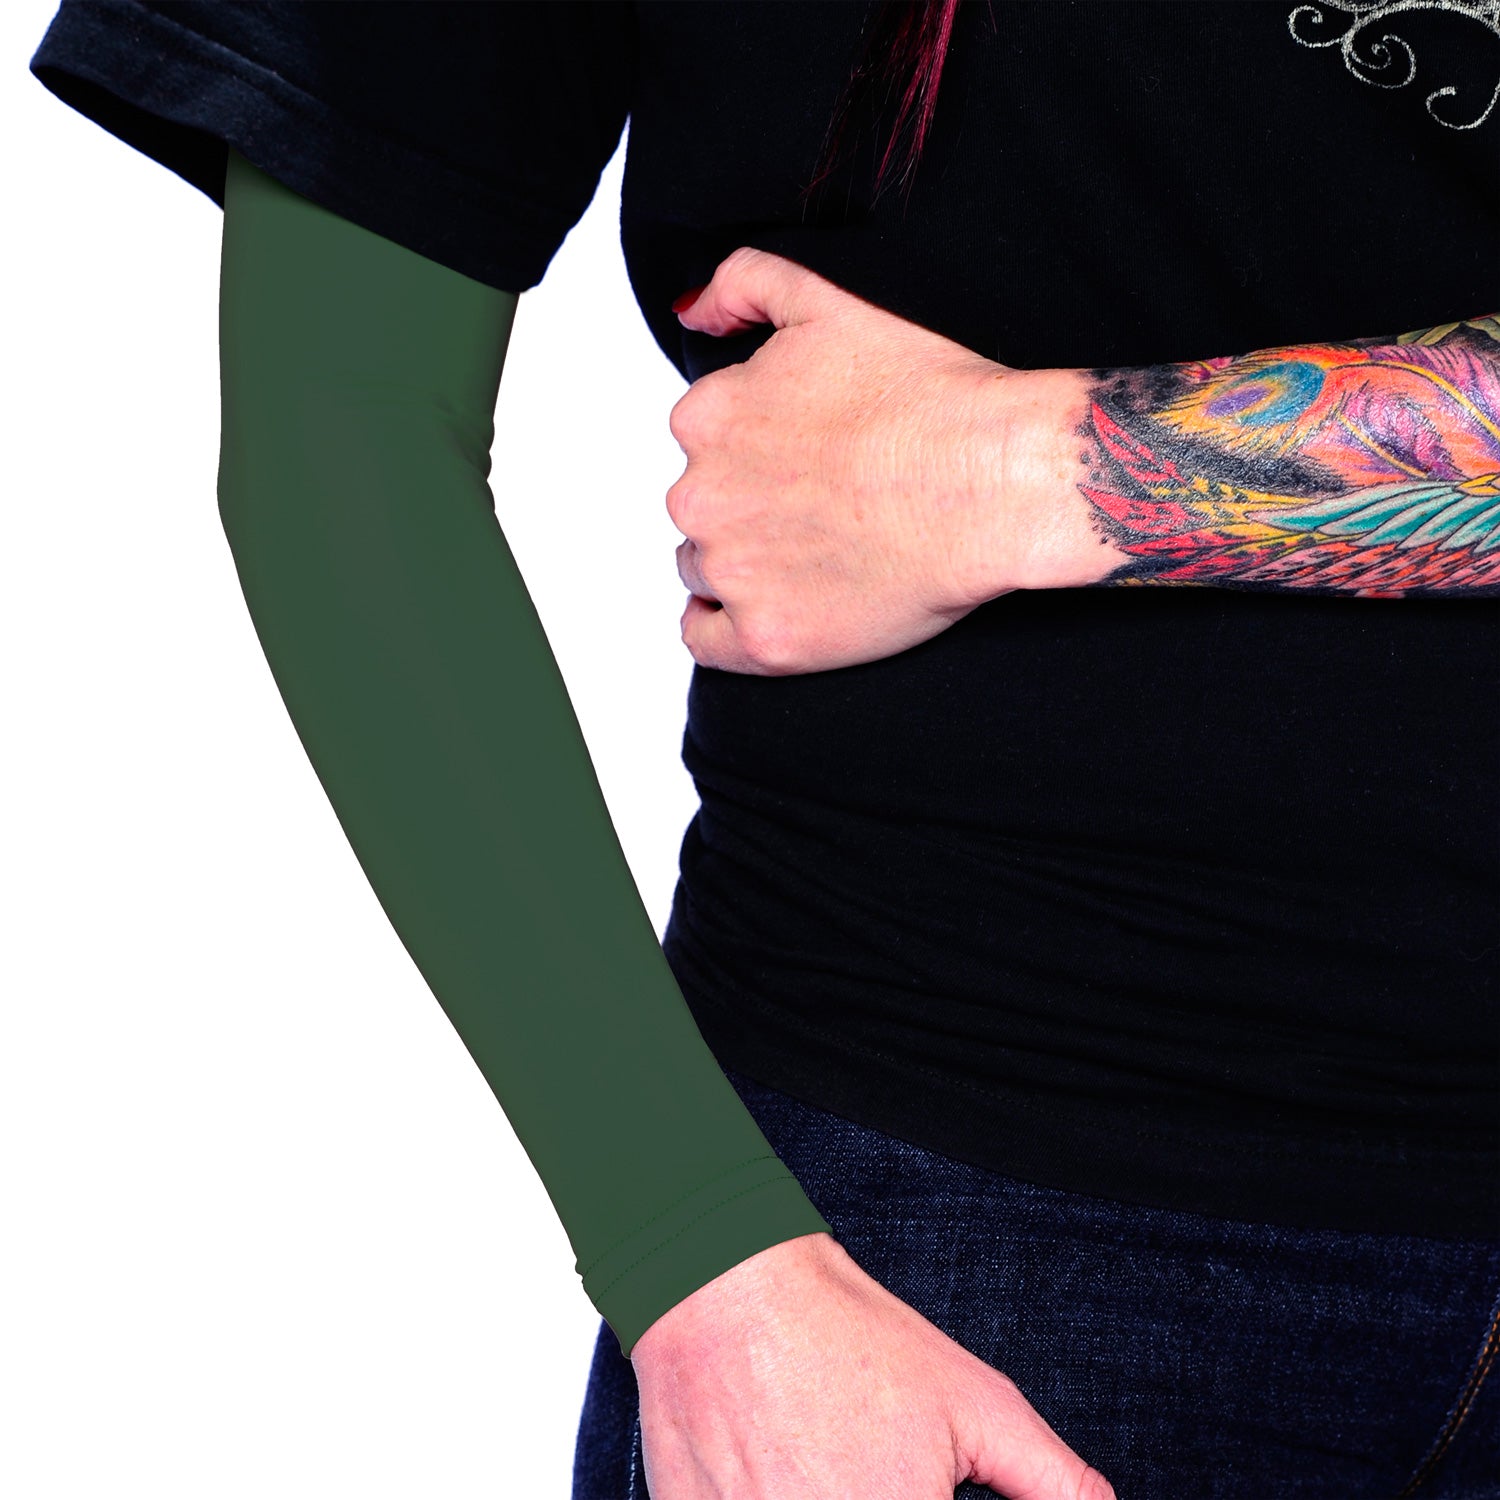 Olive Green Full Arm Sleeves for Hiding Your Tattoos at Work